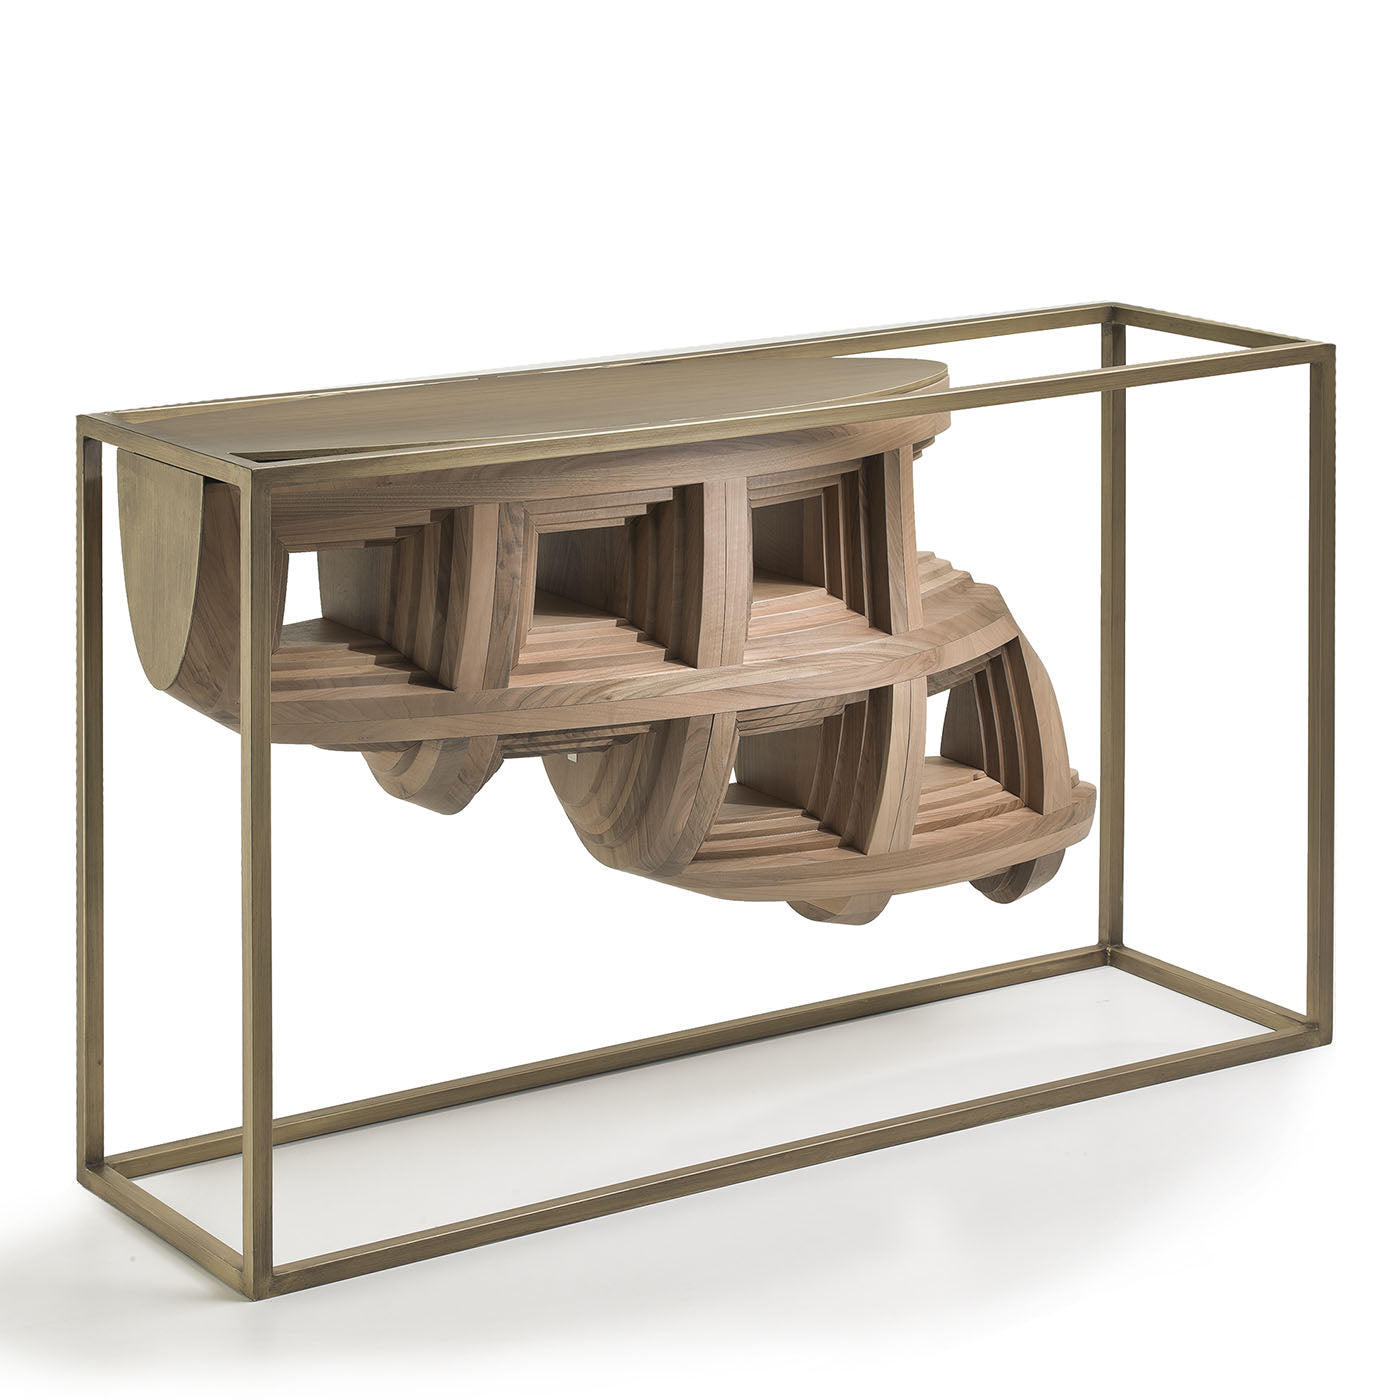 Rebus Console Table By Analogia Project - Alternative view 1